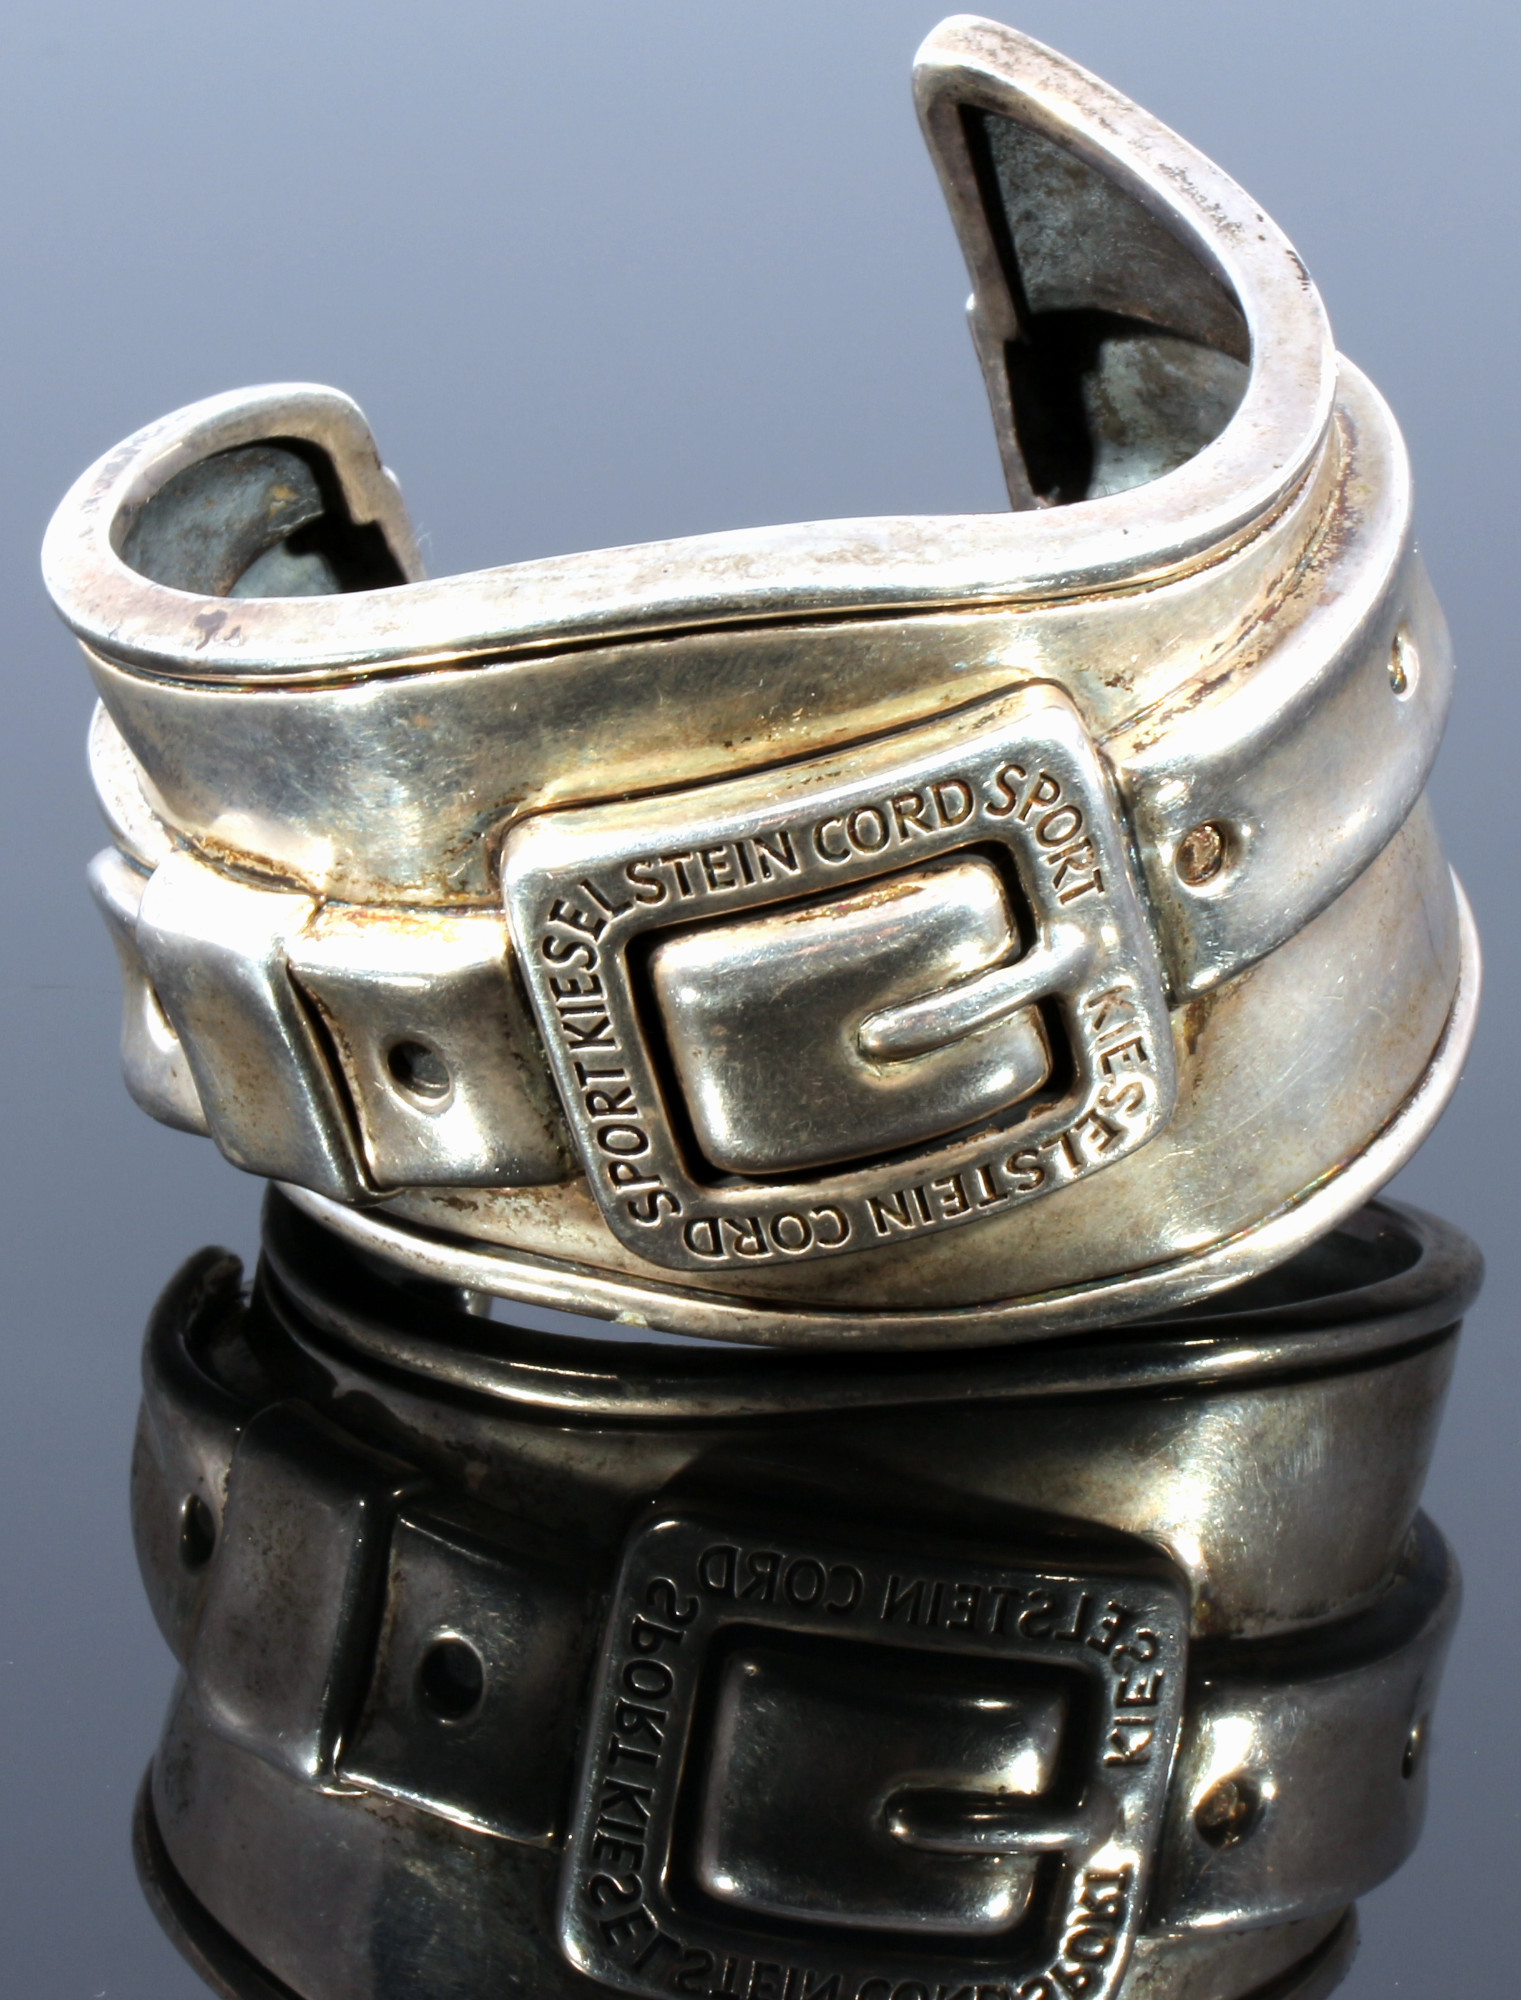 Barry Kieselstein-Cord 925 sterling silver design bangle with beltbuckle, Silber Design Armreif,